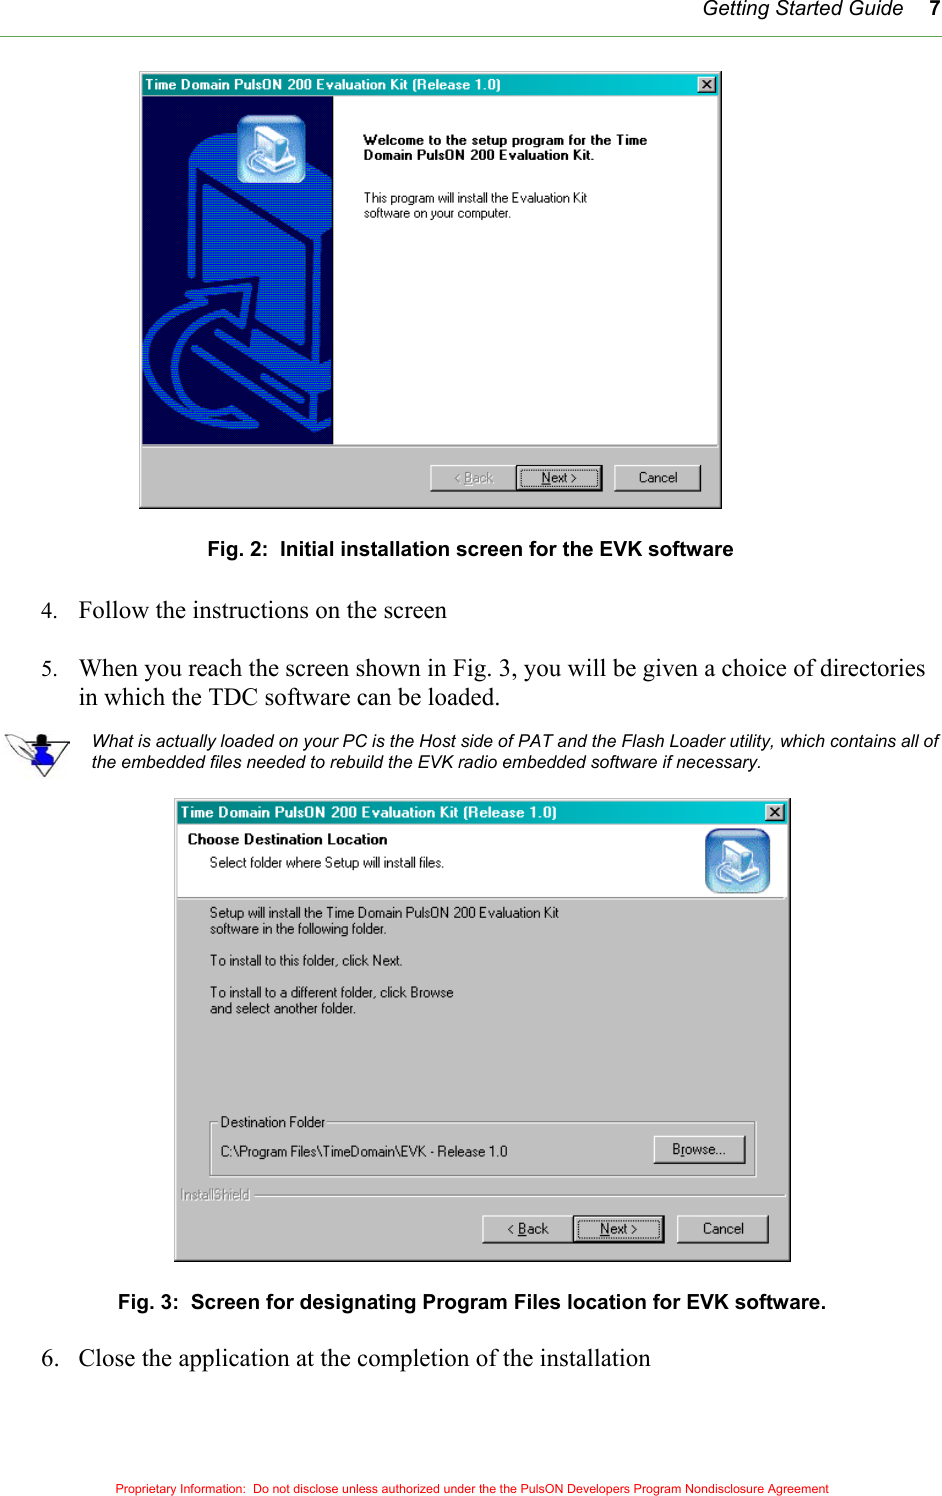   Getting Started Guide 7 Fig. 2:  Initial installation screen for the EVK software  4.  Follow the instructions on the screen    5.  When you reach the screen shown in Fig. 3, you will be given a choice of directories in which the TDC software can be loaded.    What is actually loaded on your PC is the Host side of PAT and the Flash Loader utility, which contains all of the embedded files needed to rebuild the EVK radio embedded software if necessary.       Fig. 3:  Screen for designating Program Files location for EVK software.  6.  Close the application at the completion of the installation   Proprietary Information:  Do not disclose unless authorized under the the PulsON Developers Program Nondisclosure Agreement 